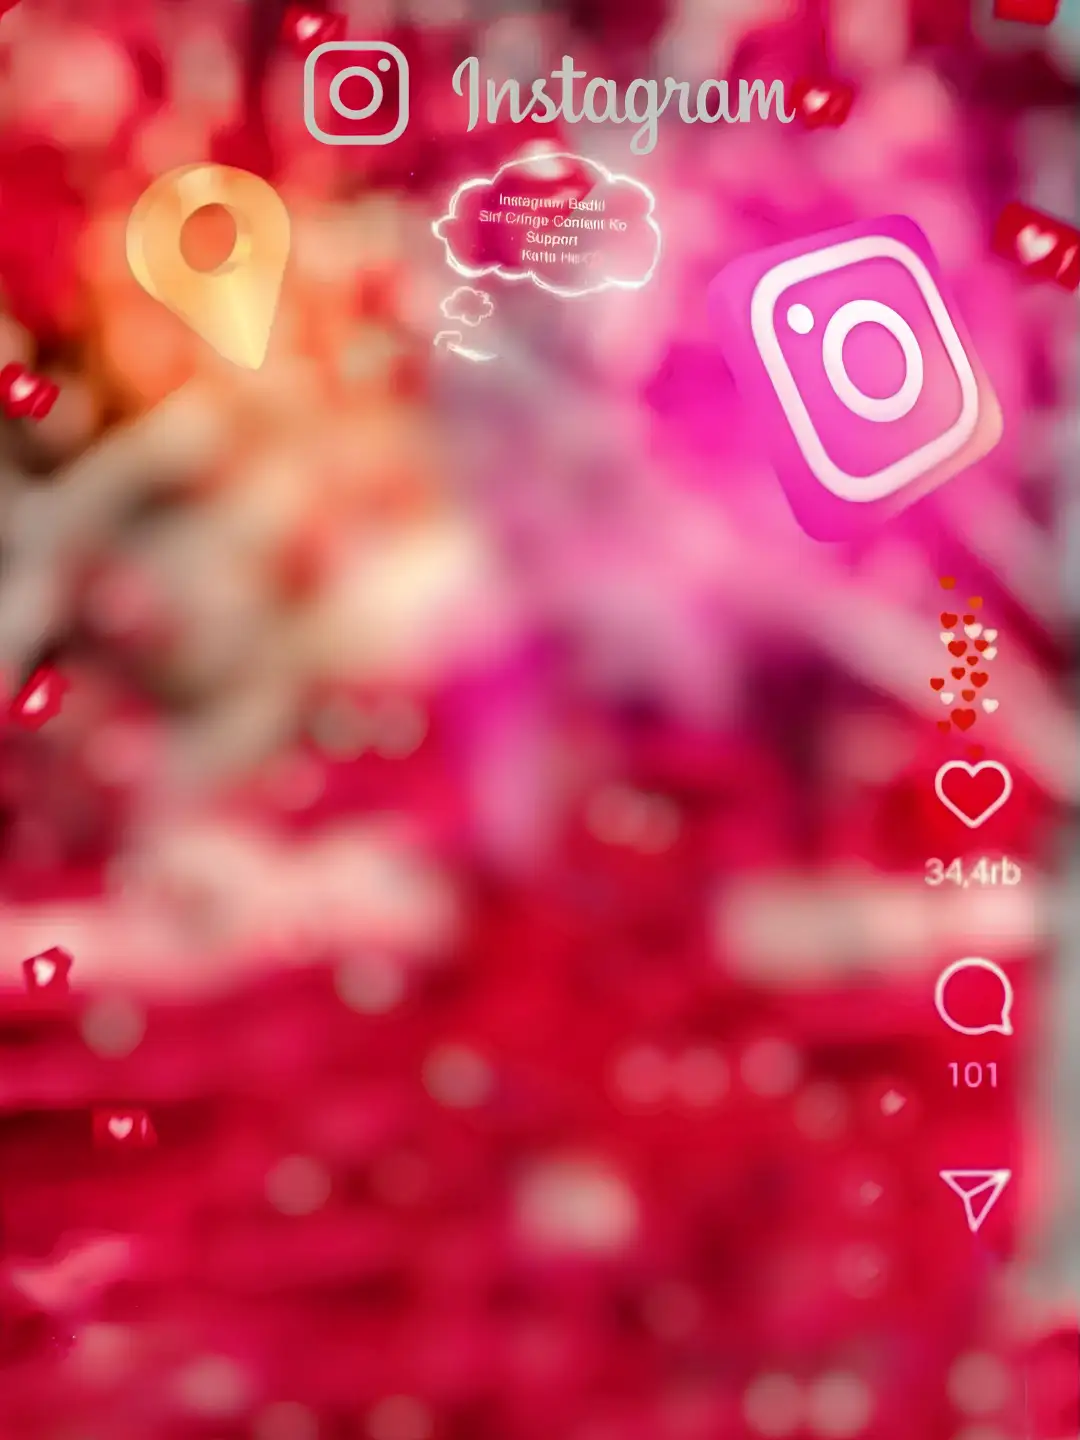 Download Instagram Viral Photo Editing Background Hd #FREE